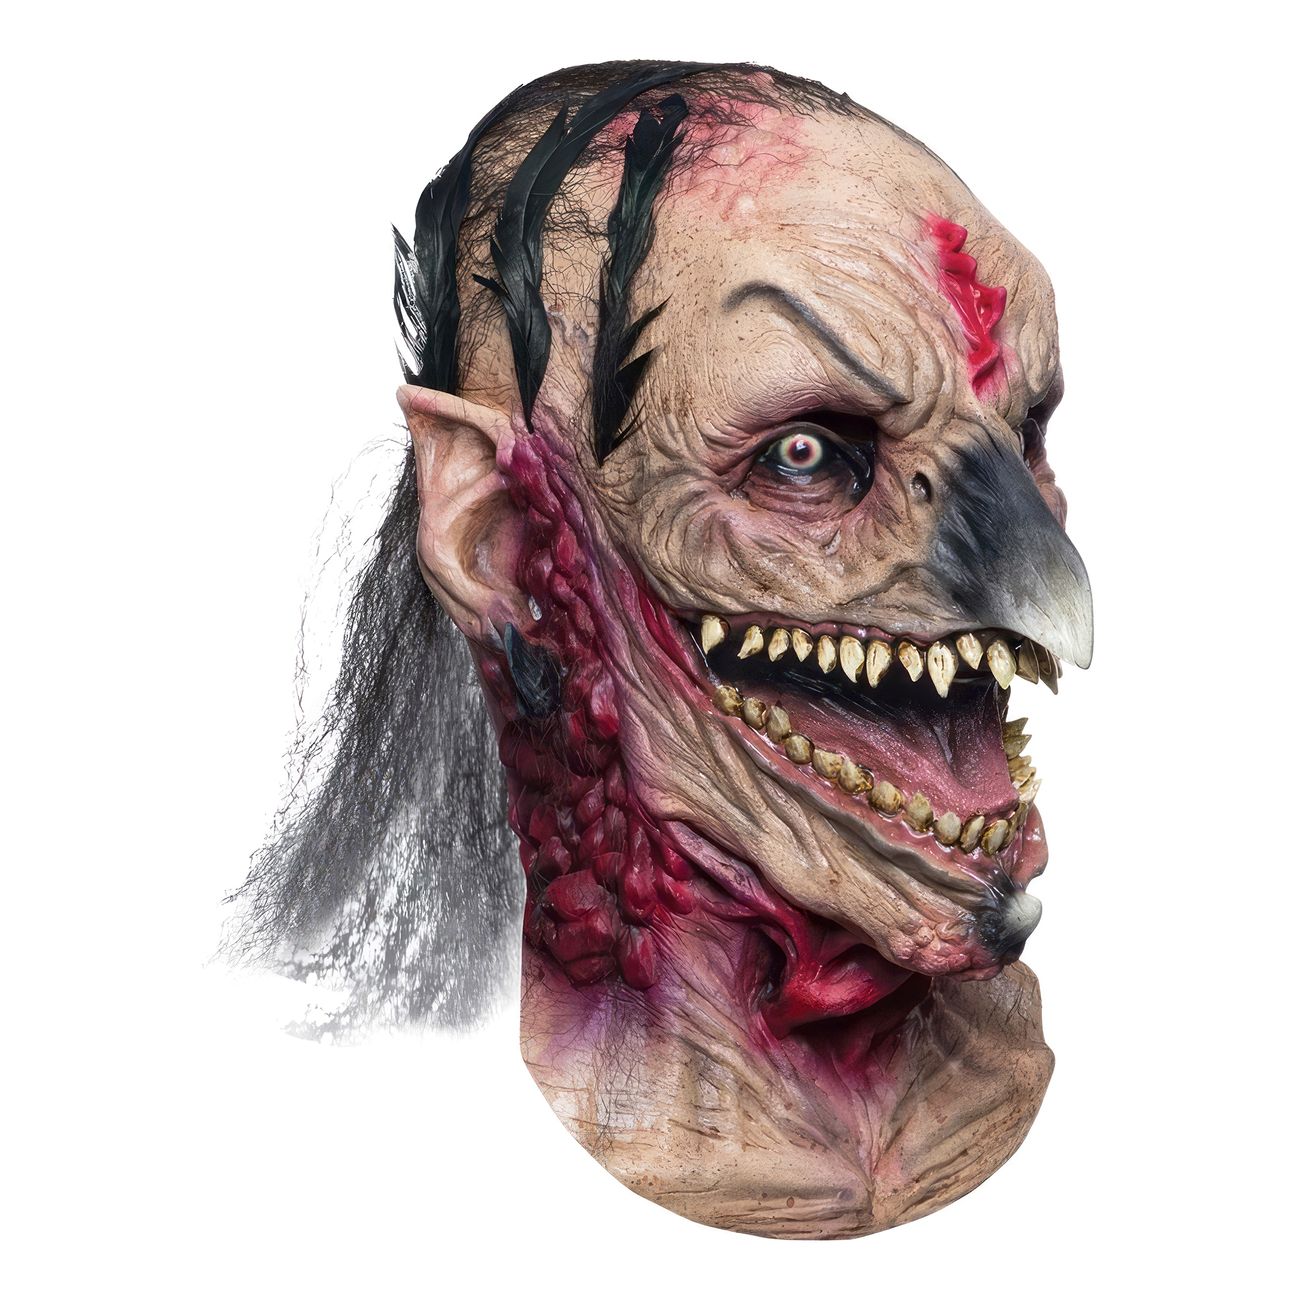 ghoulish-harwitch-mask-97081-1